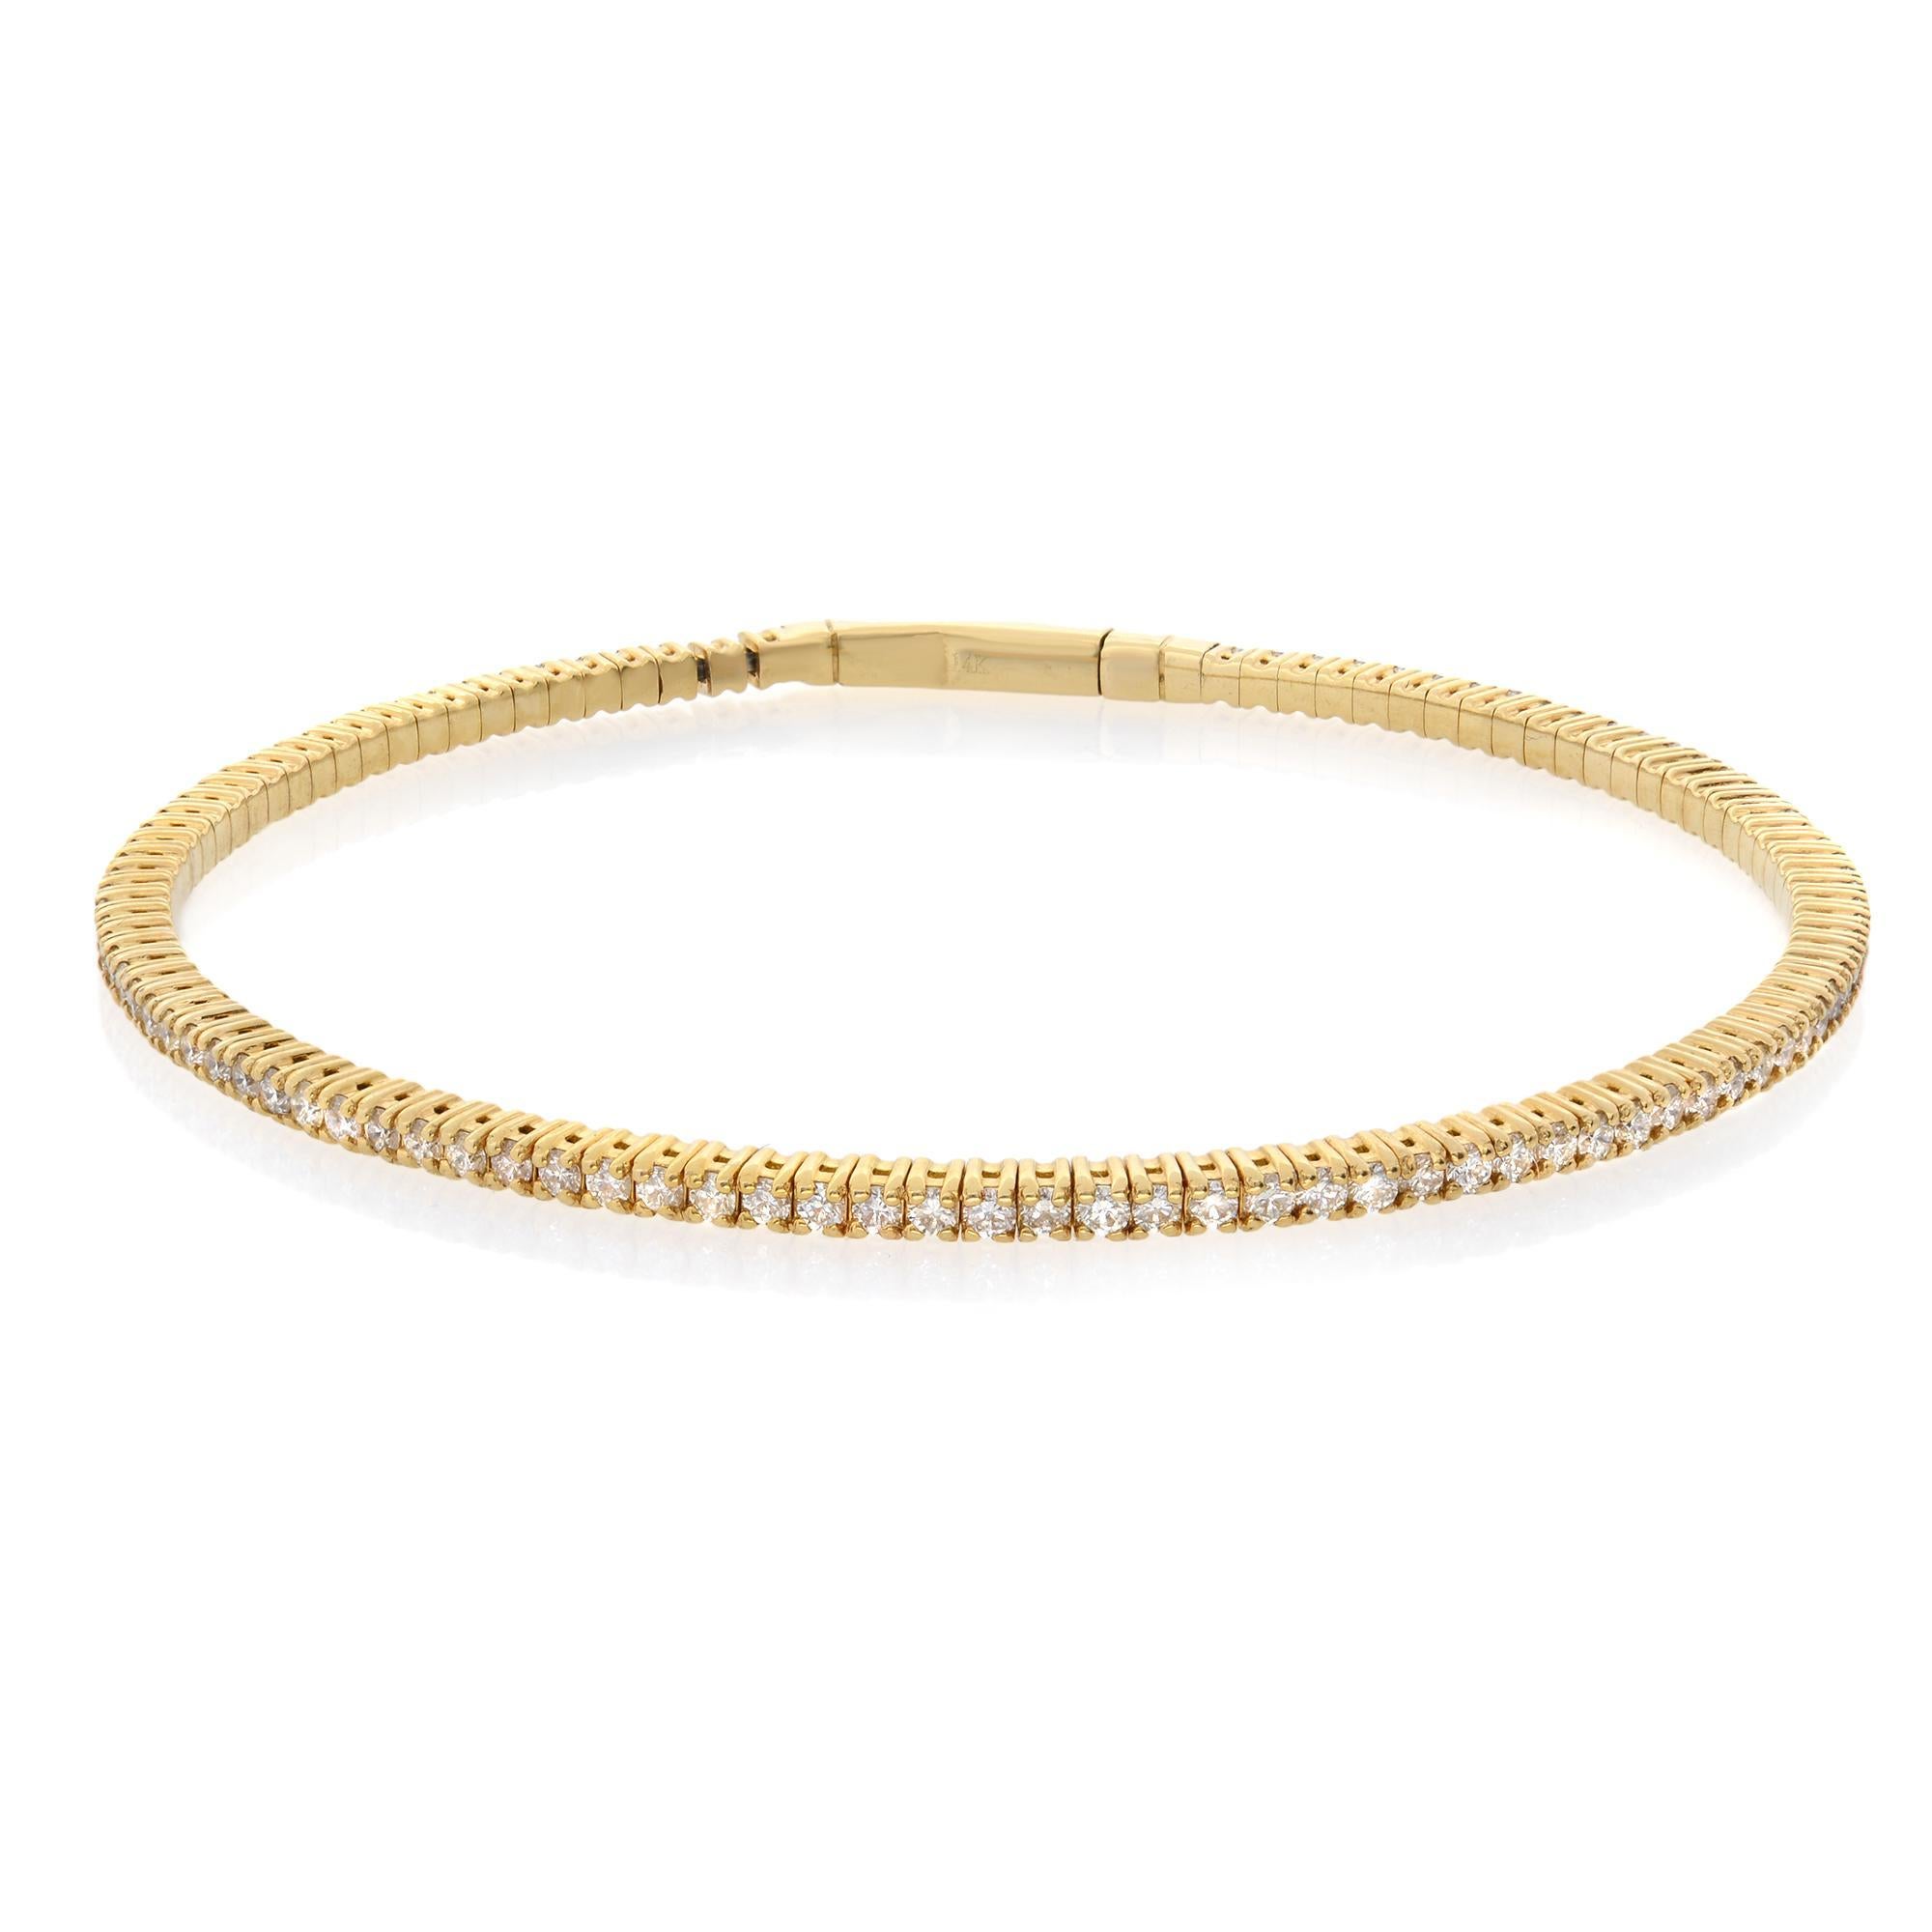 A classic look with easy elegance, this diamond bangle exudes sophistication. One stunning flexible bangle bracelet in 14K yellow gold, prong-set with fine white diamonds with a total weight of 1.50cts. The bangle measures 1.8mm in width and weighs